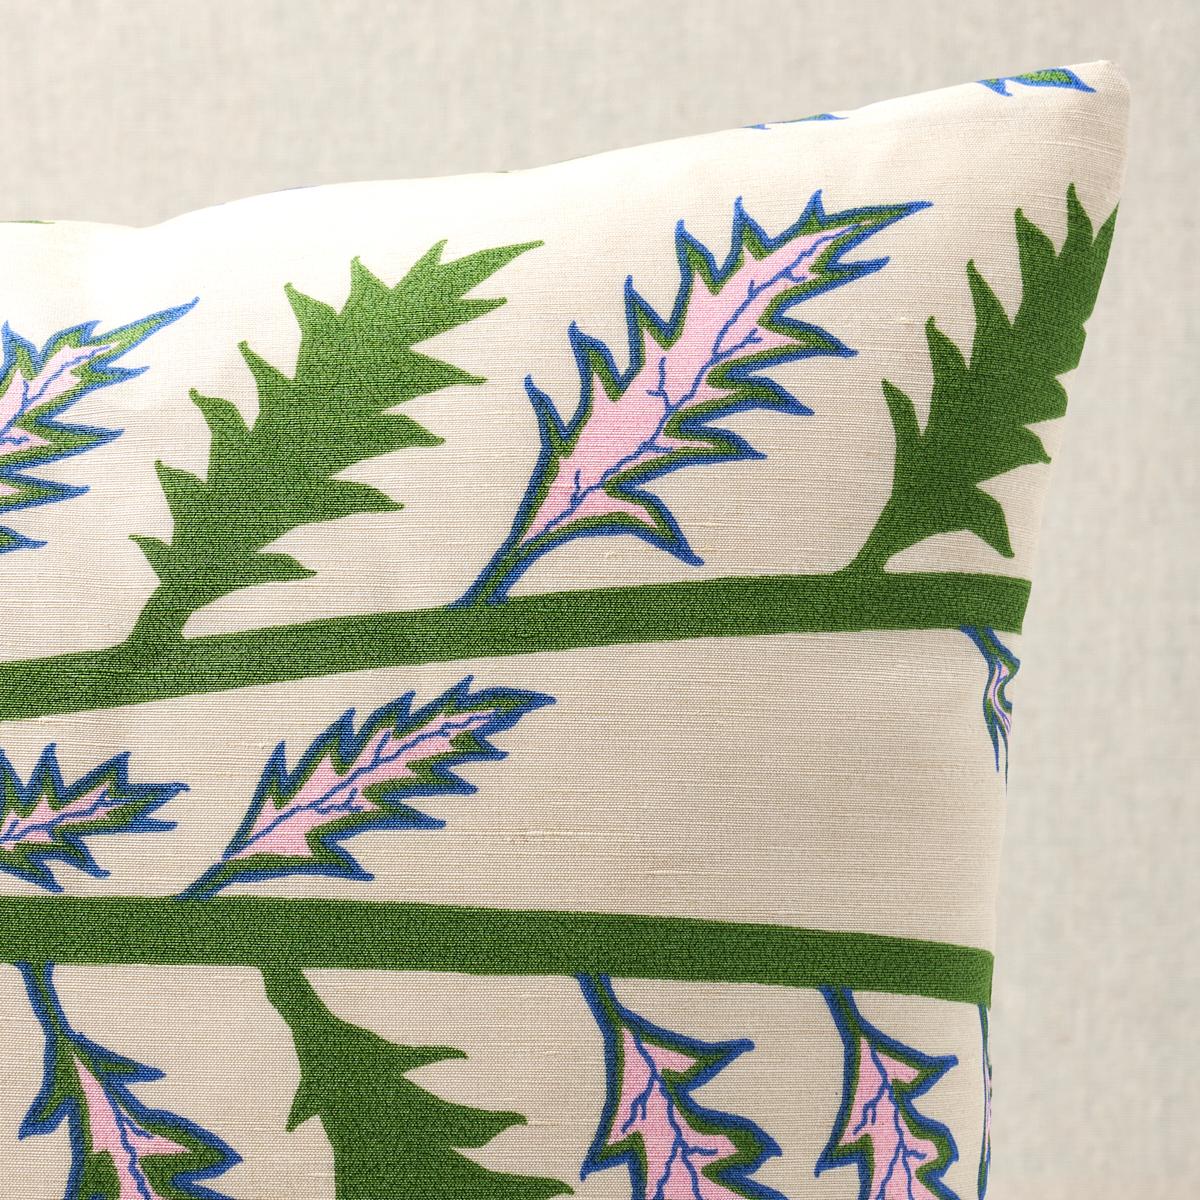 This pillow features Thistle by Neisha Crosland for Schumacher with a knife edge finish. As elegant as it is edgy, this fantastical thistle motif reflects Neisha Crosland’s passion for espaliers, trees trained to grow flat against a wall with the